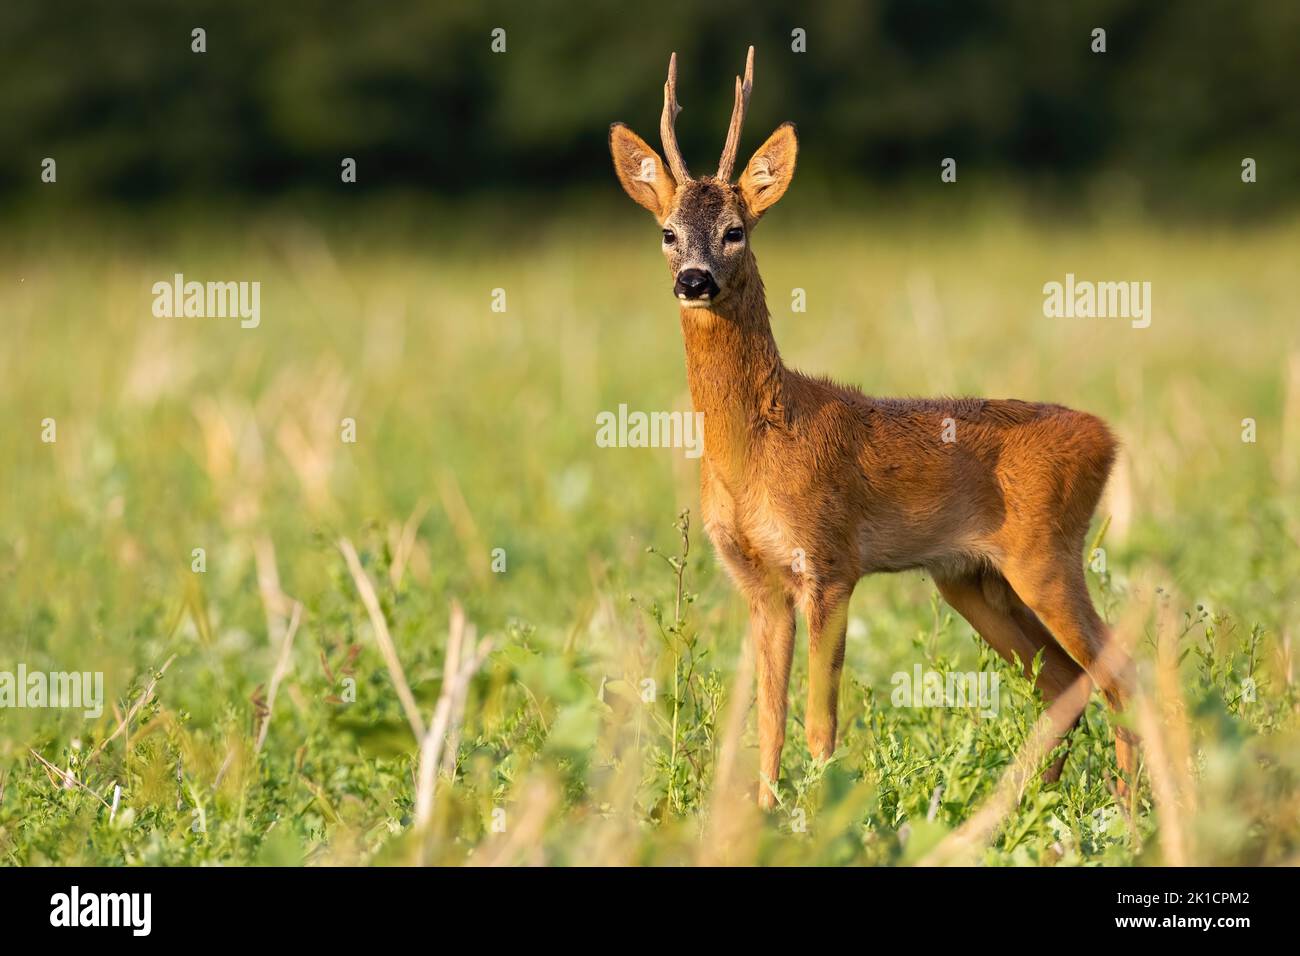 Roe deer buck standing on a stubble field in summer nature Stock Photo